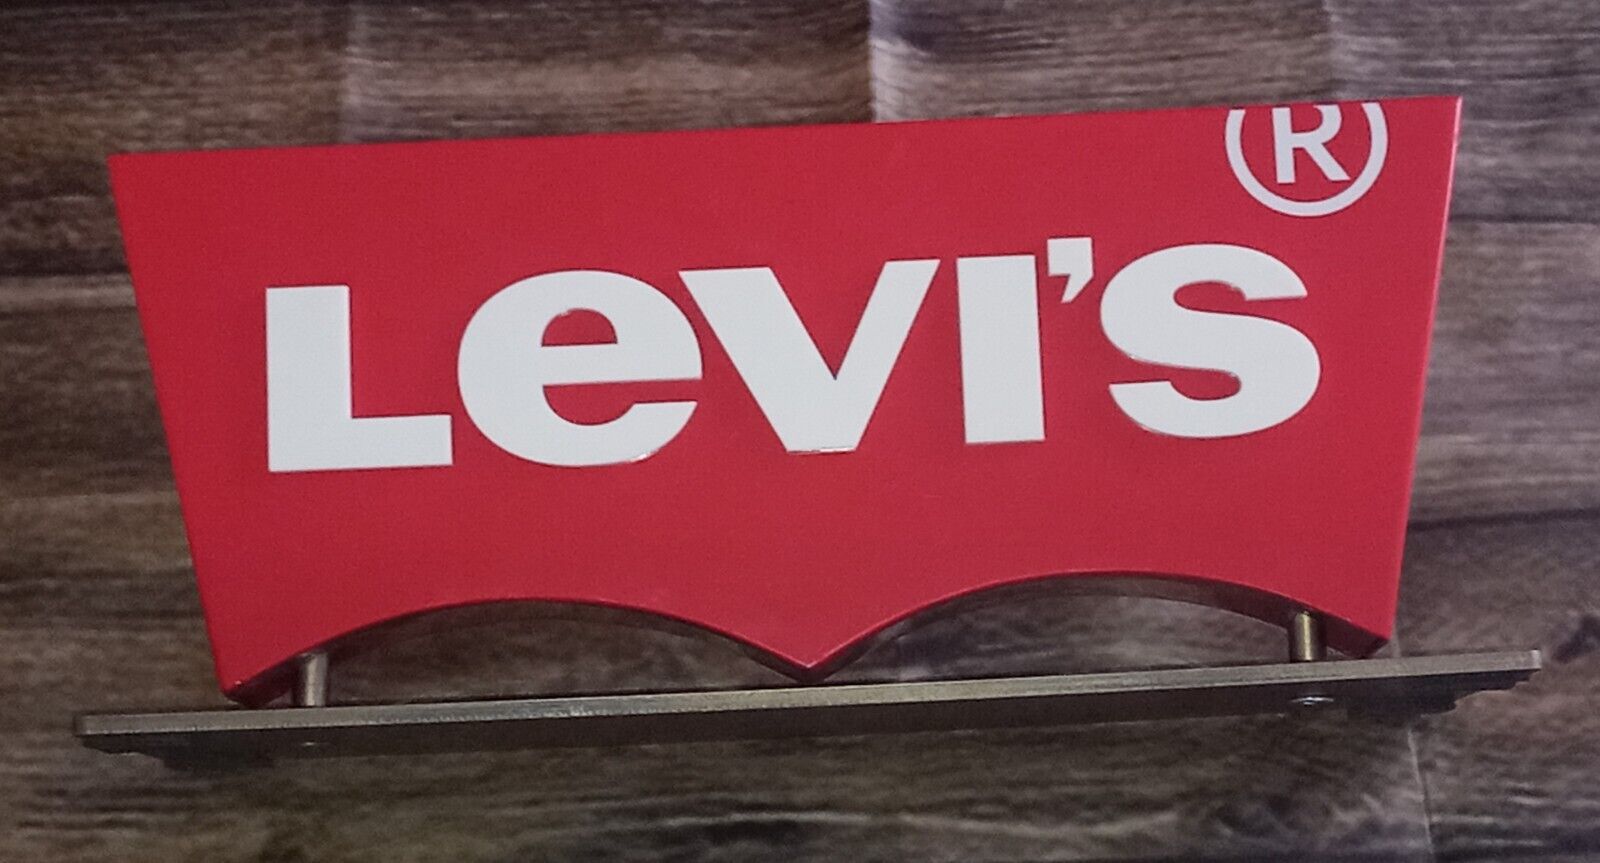 Vintage Red Tab LEVI'S Denim Jeans Retail Store Display Advertising Stand Sign